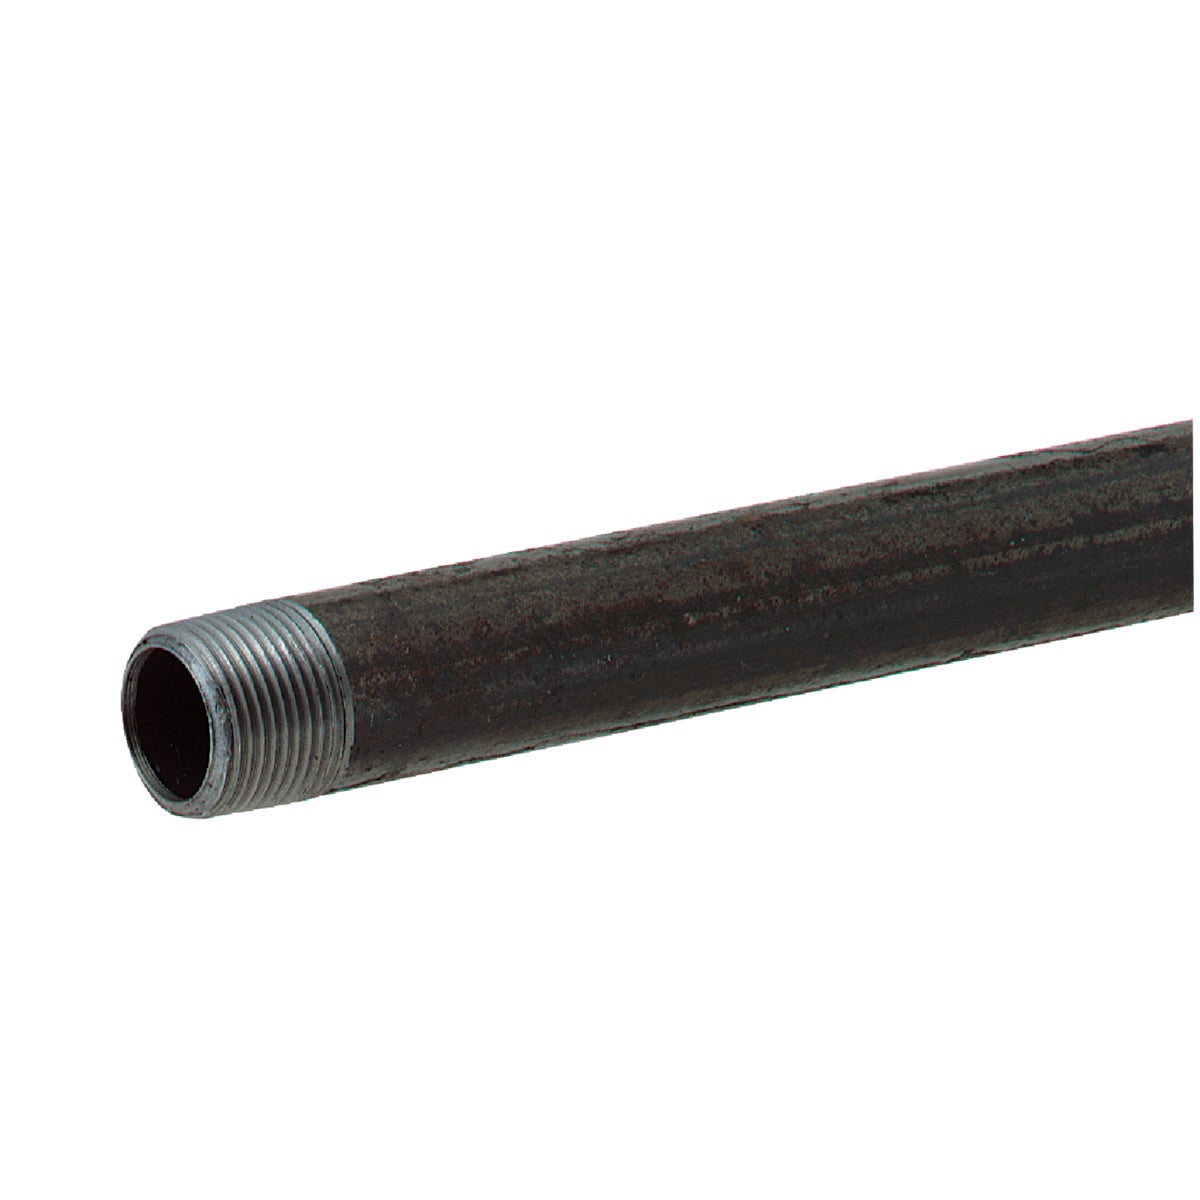 1-1/2X48 BLK RDI-CT PIPE